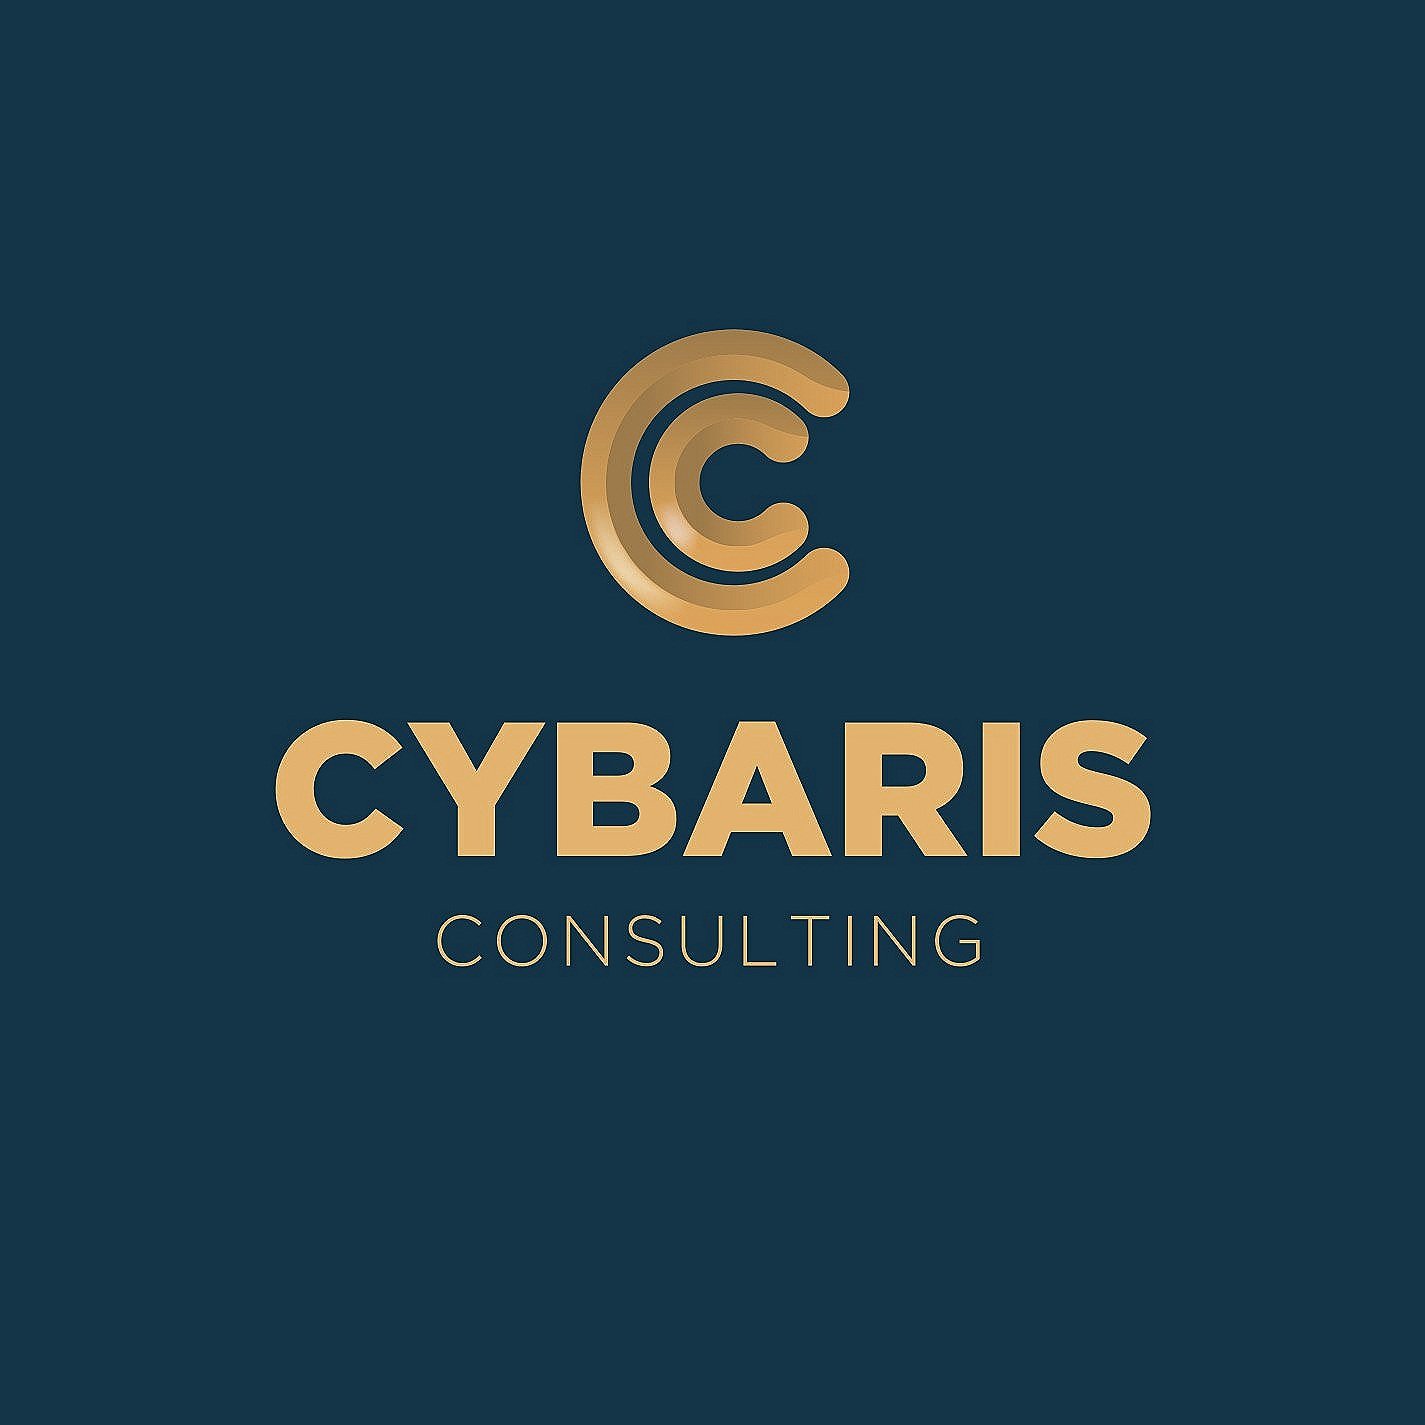 Cybaris Consulting